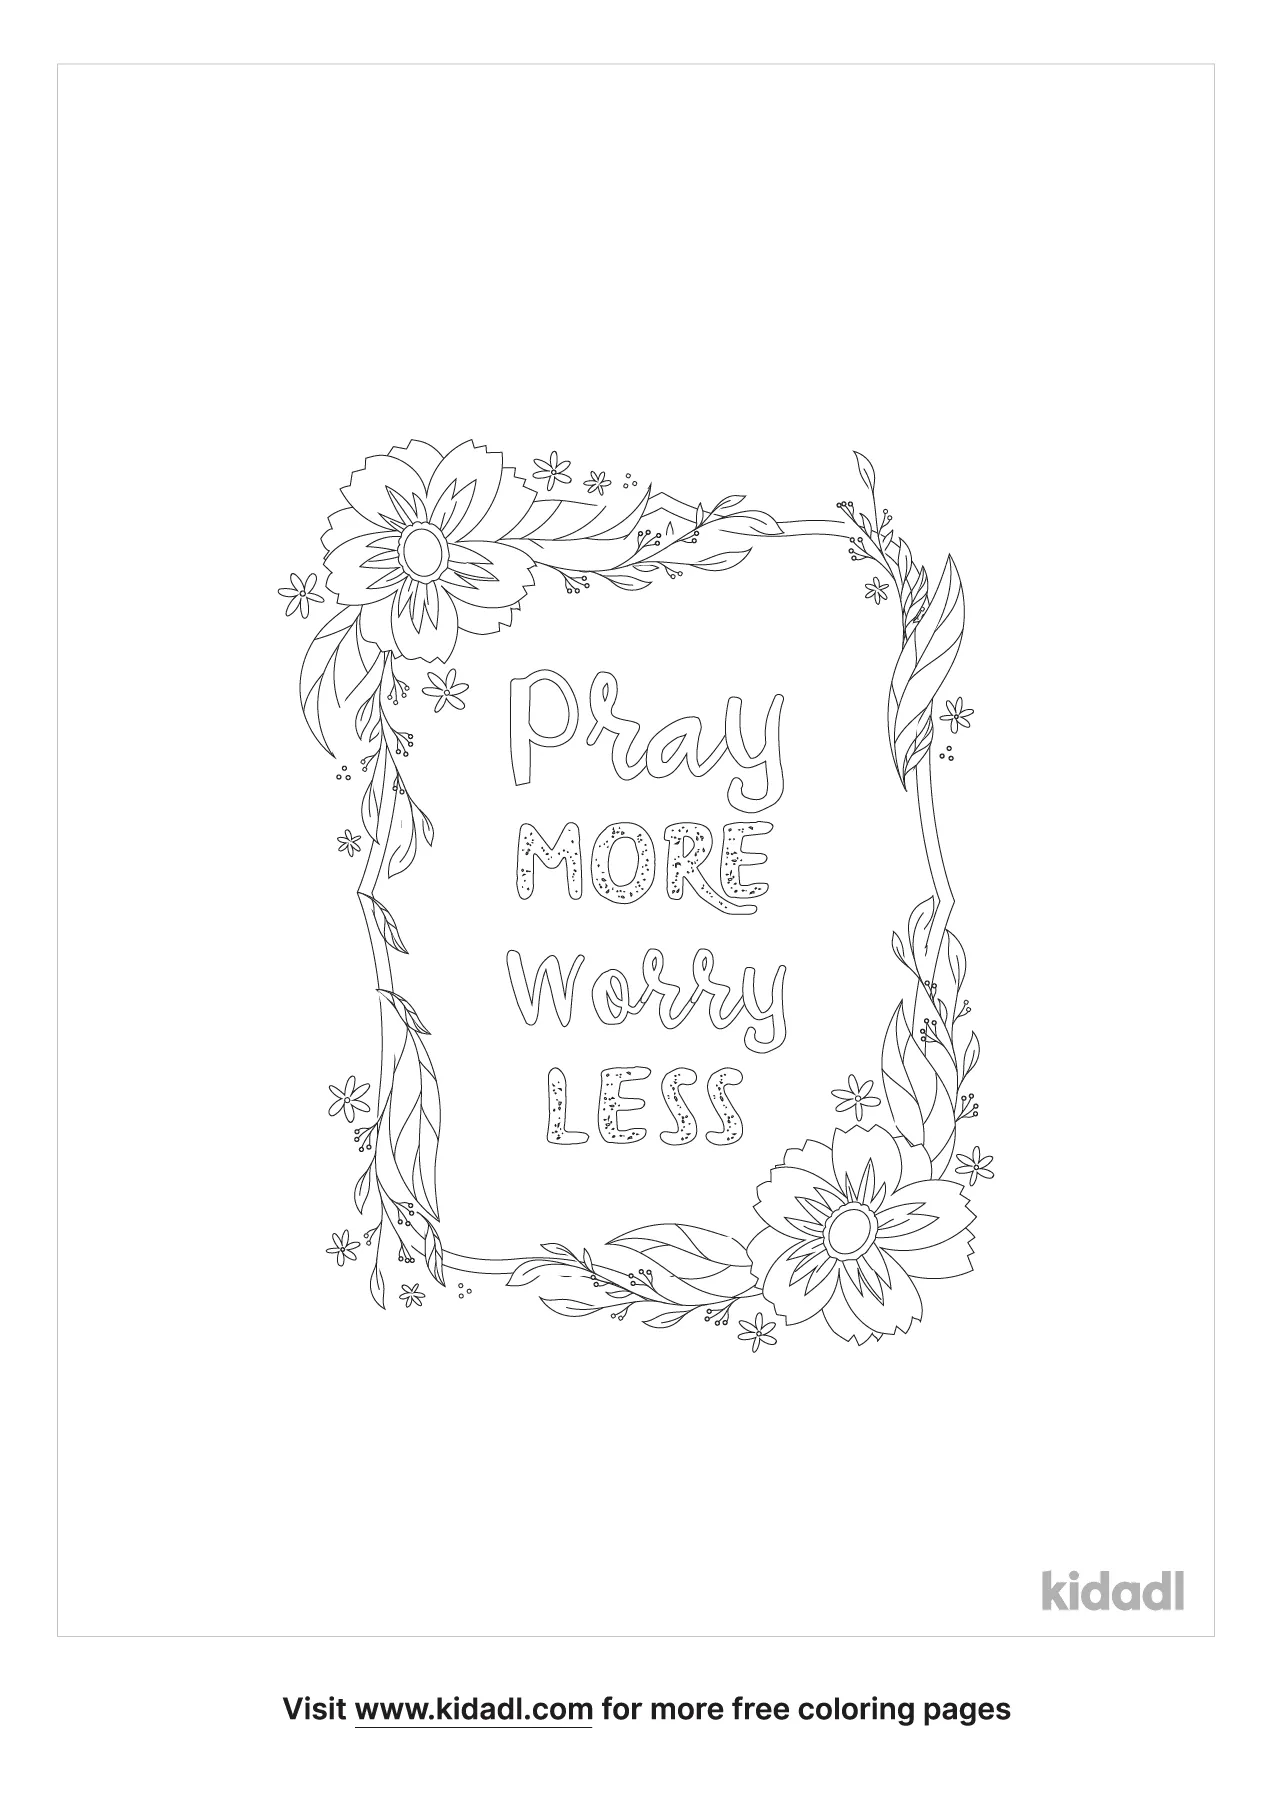 Free Strength Quote Coloring Page | Coloring Page Printables | Kidadl